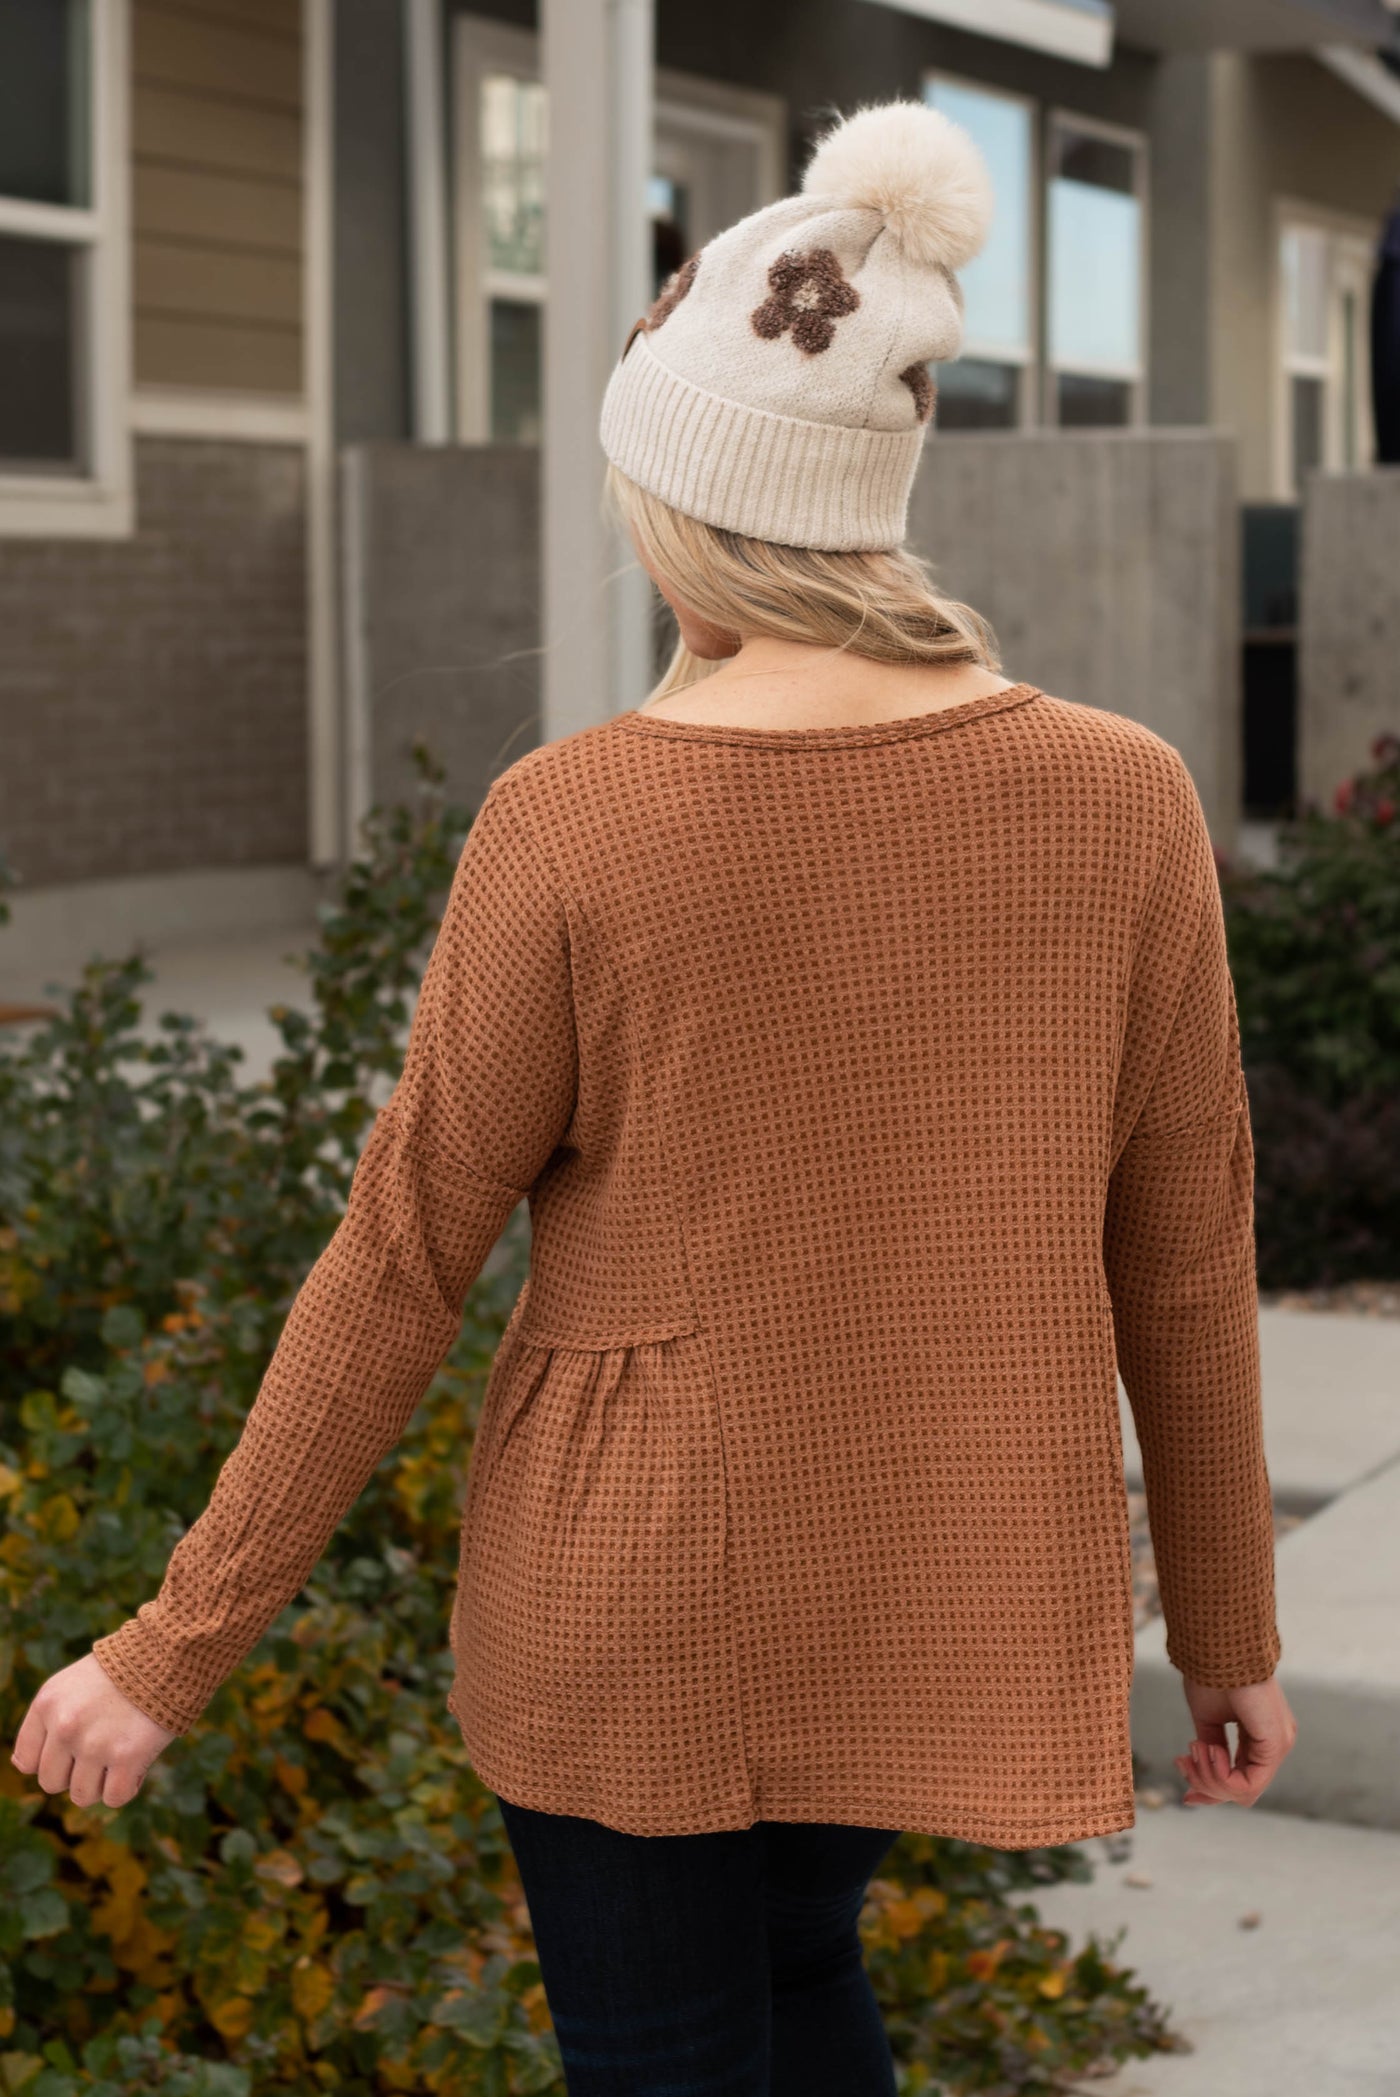 Back view of a brown top